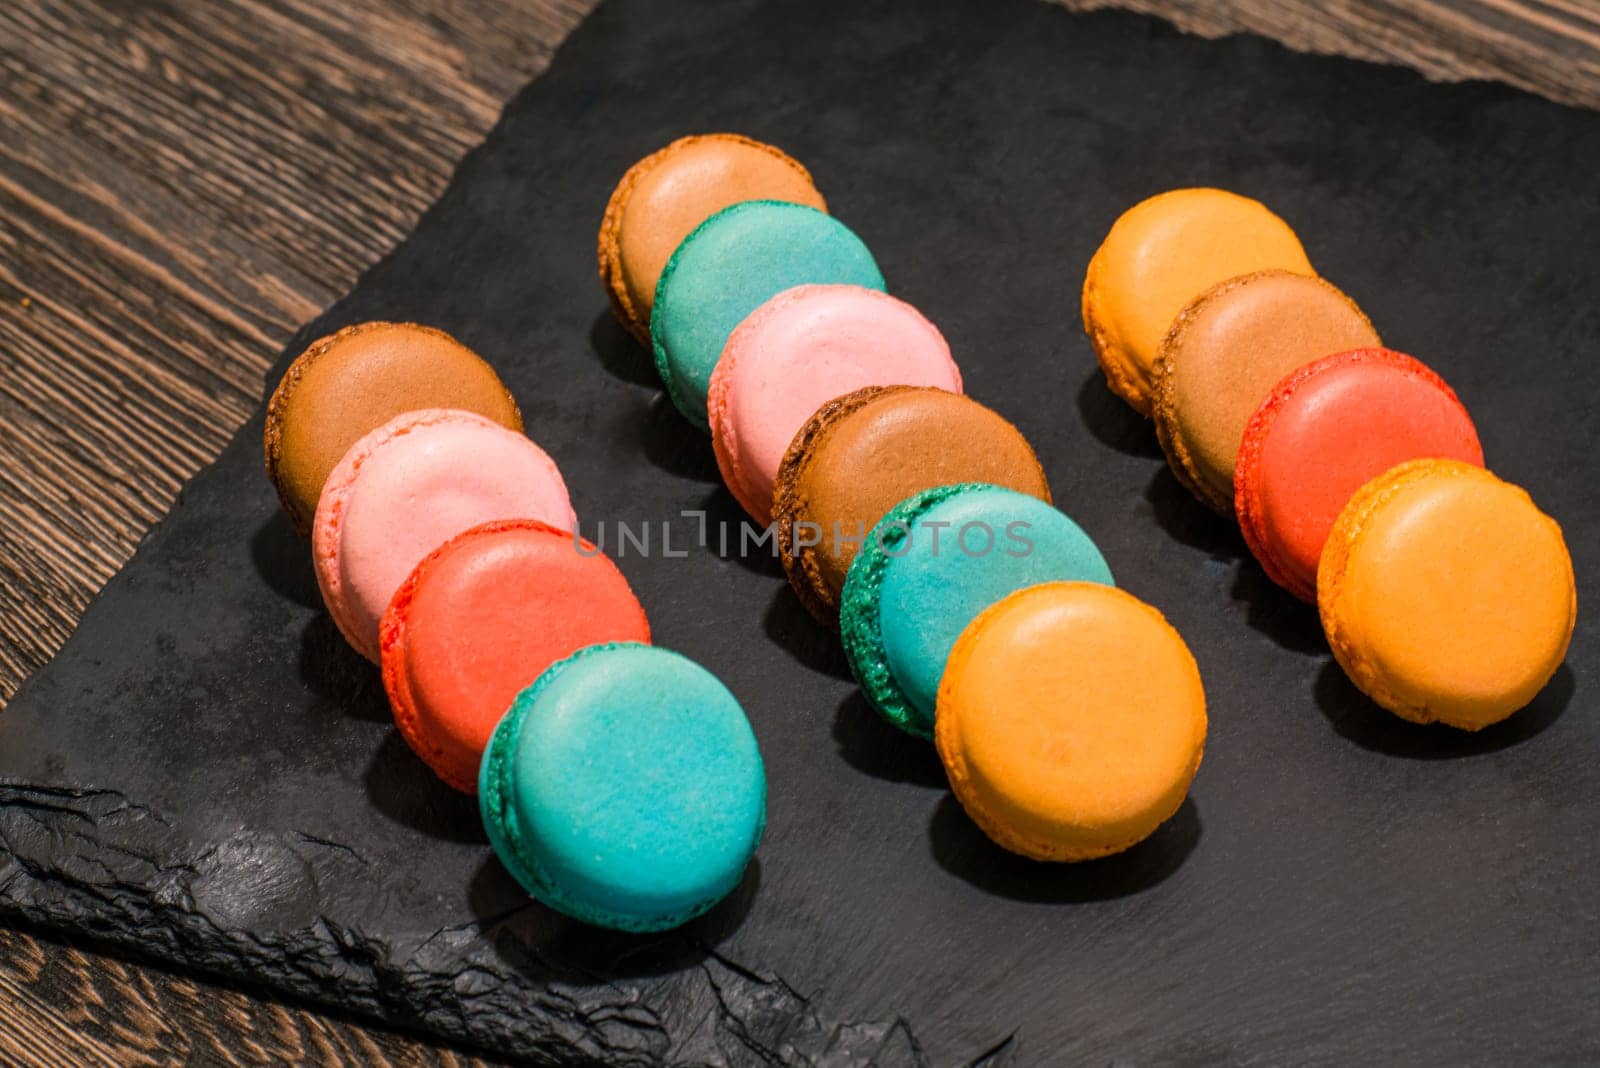 The multicolored French macaroon cookies on a black stone by A_Karim